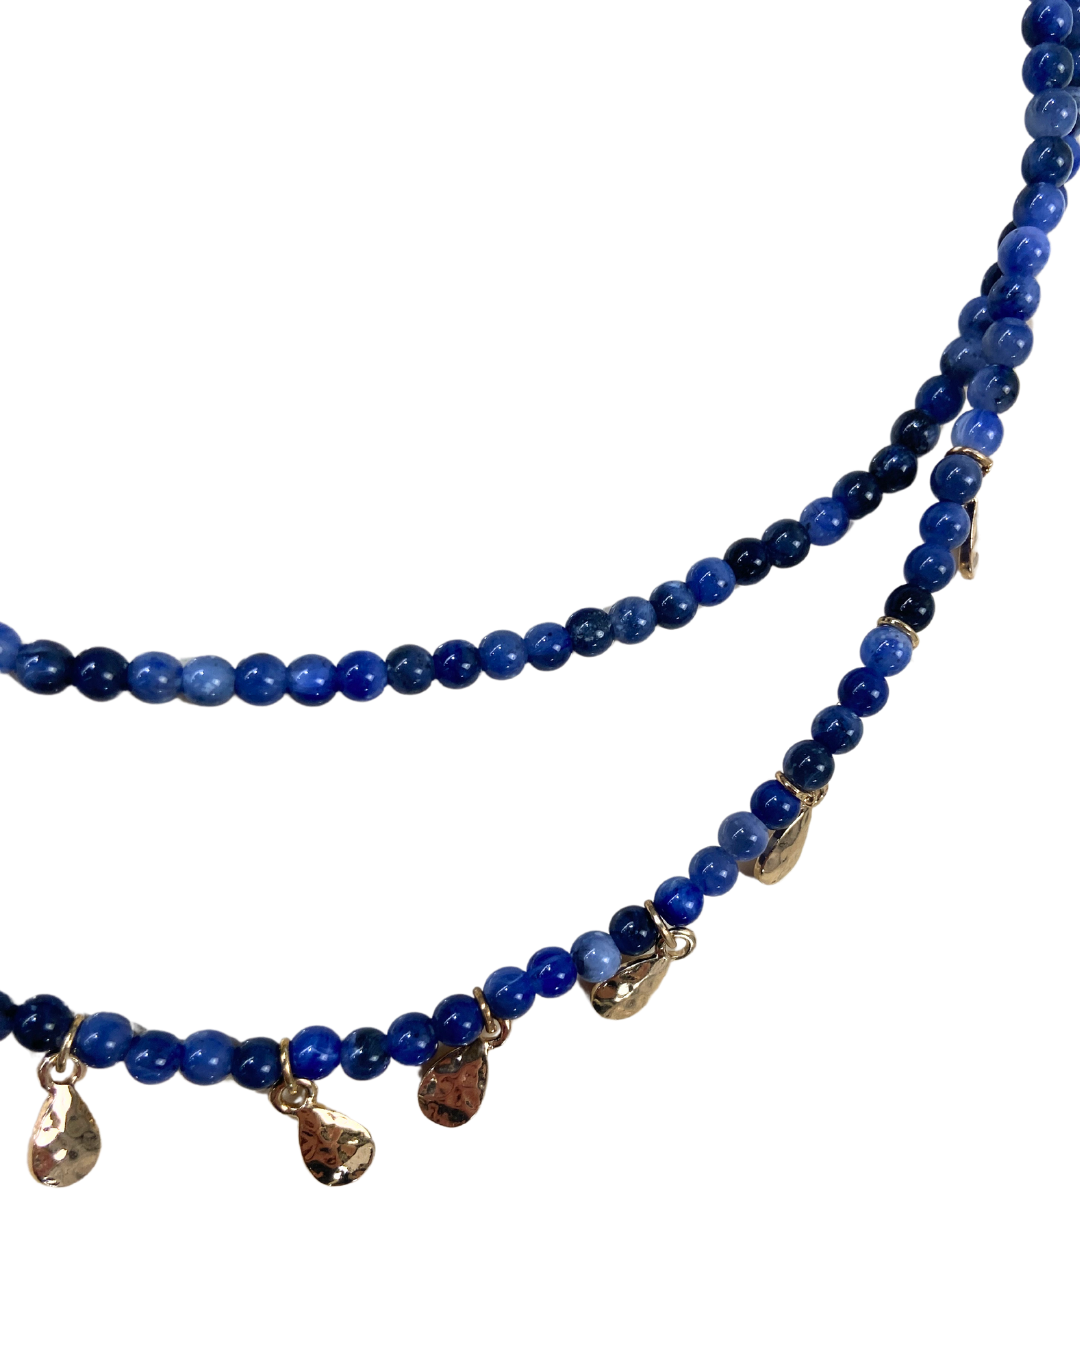 Next Blue Beaded Necklace